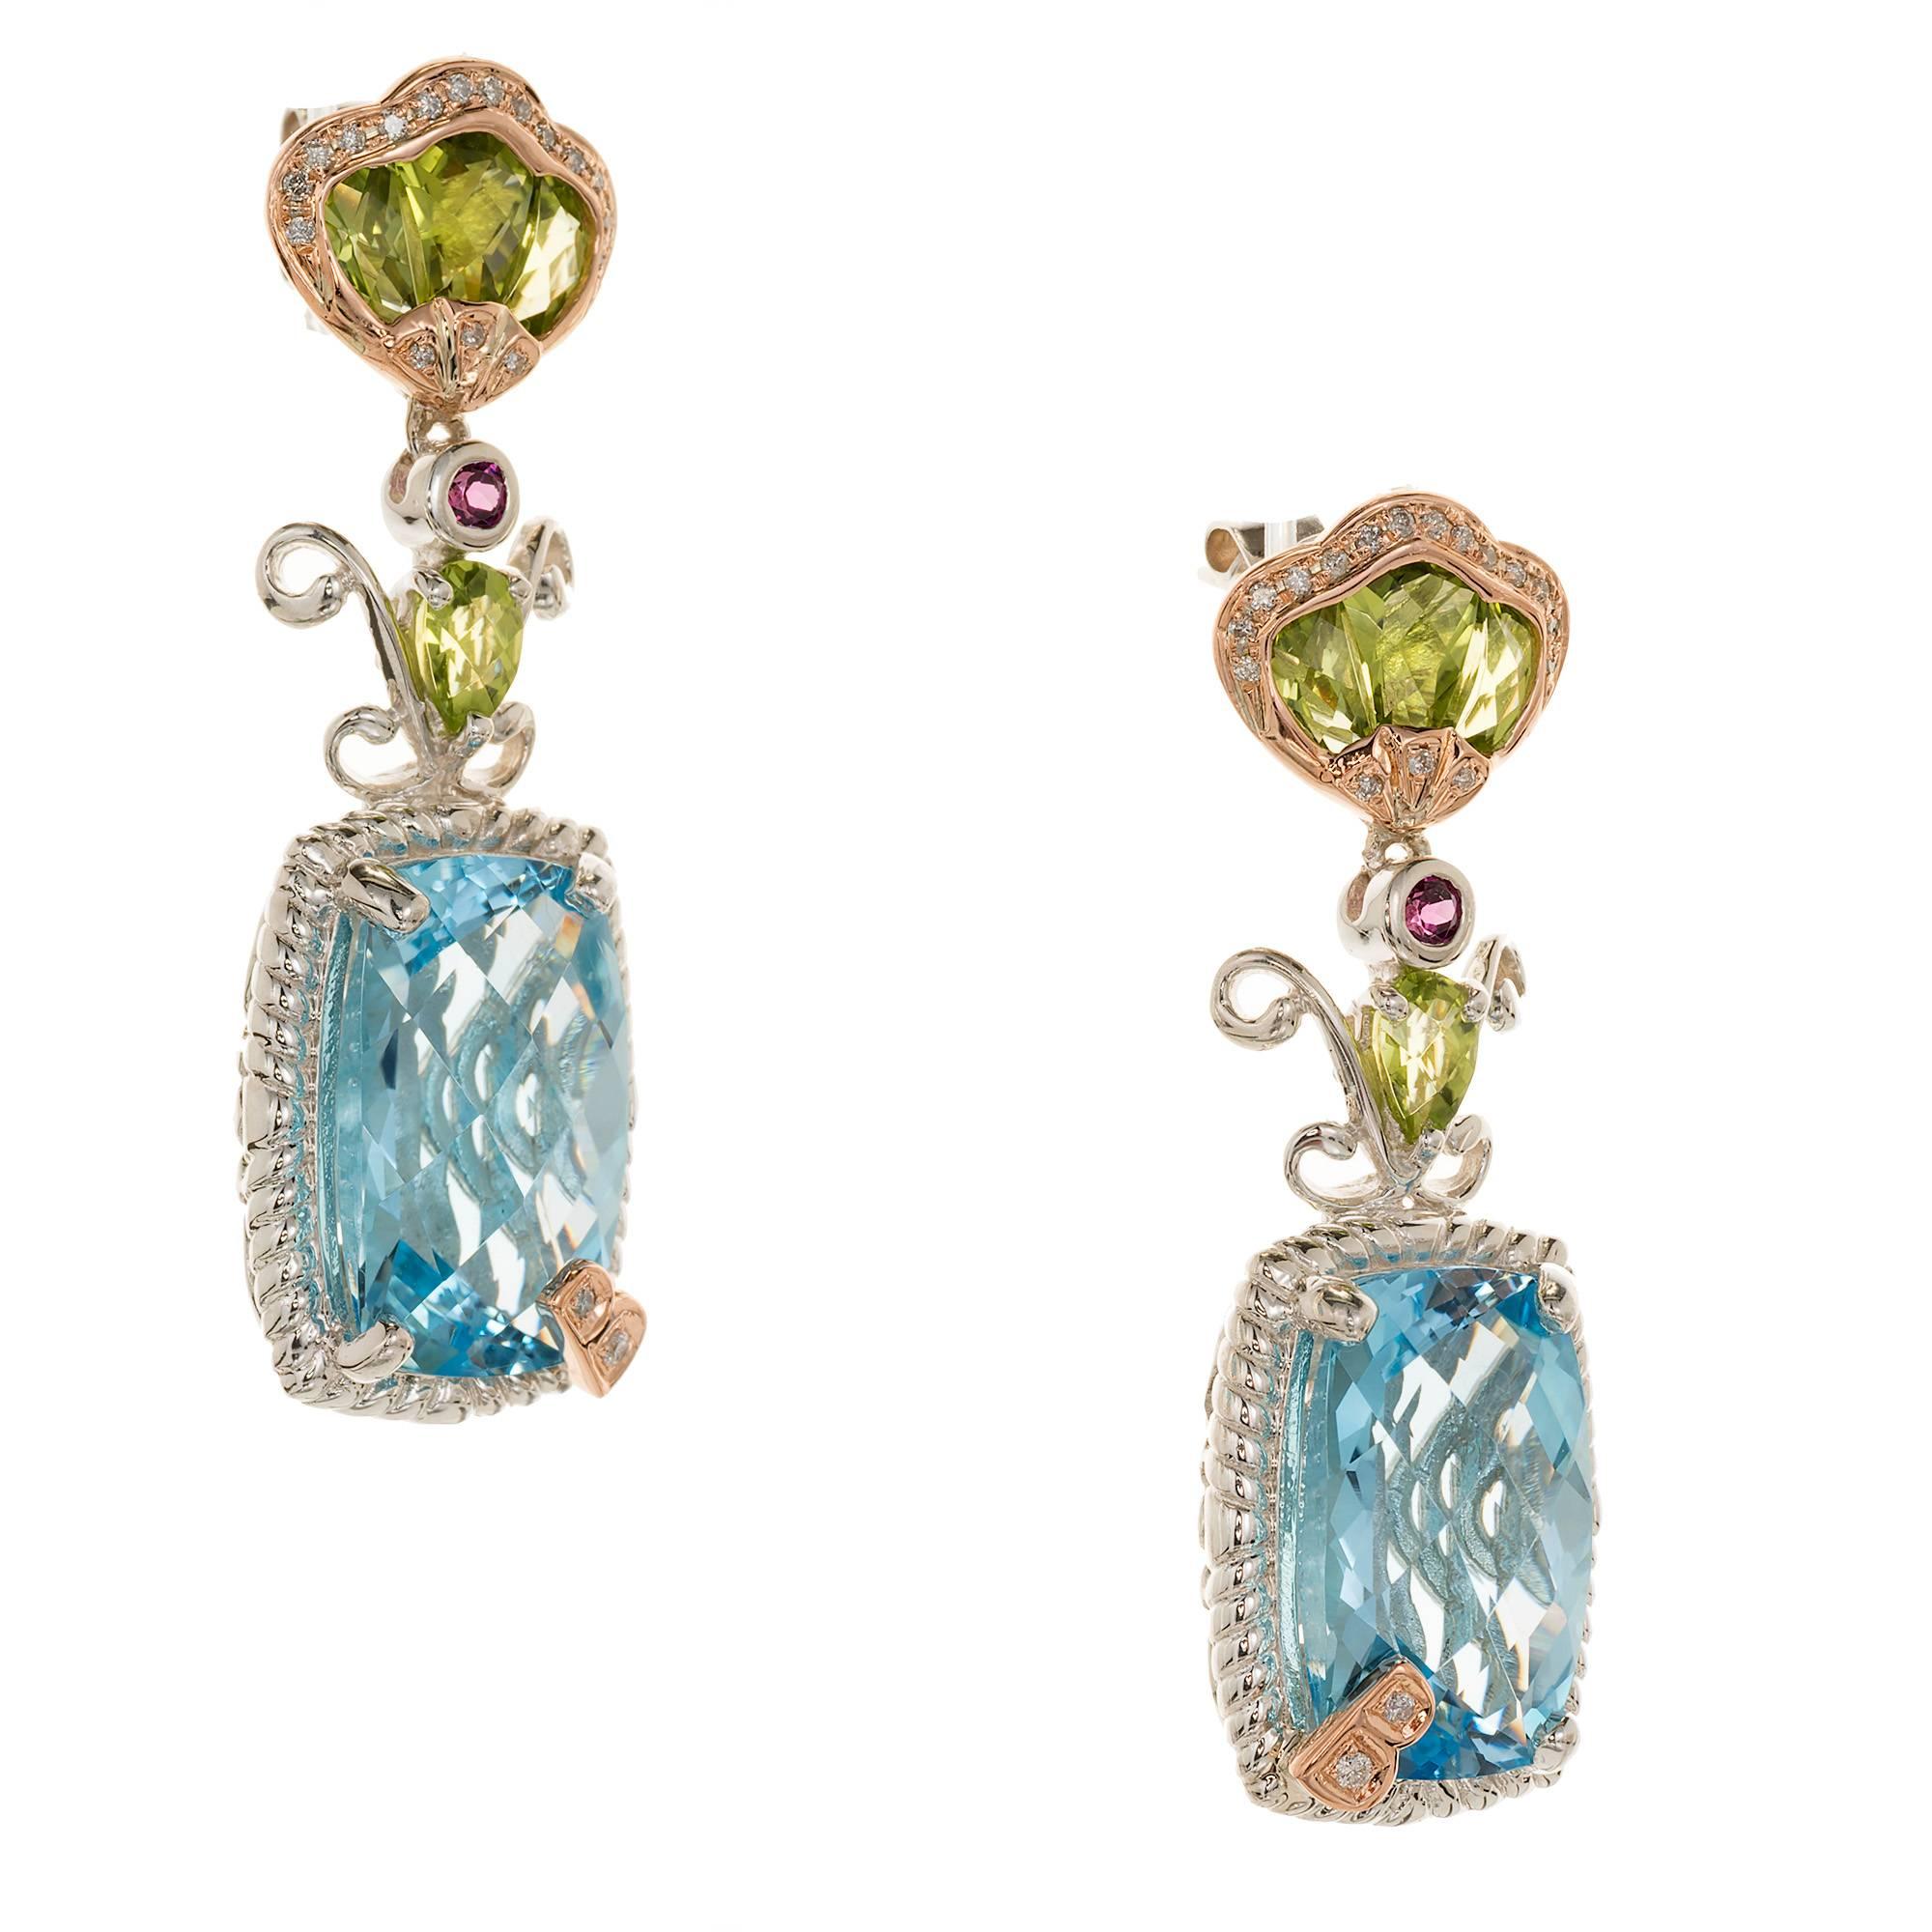 Bellarri silver and 18k rose gold dangle earrings with Peridot, diamond, blue Topaz and garnet Fully finished rear galleries.

2 blue Topaz, 15 x 11 rectangle, approx. total weight .22cts
8 custom cut Peridot, approx. total weight 1.20cts
38 round